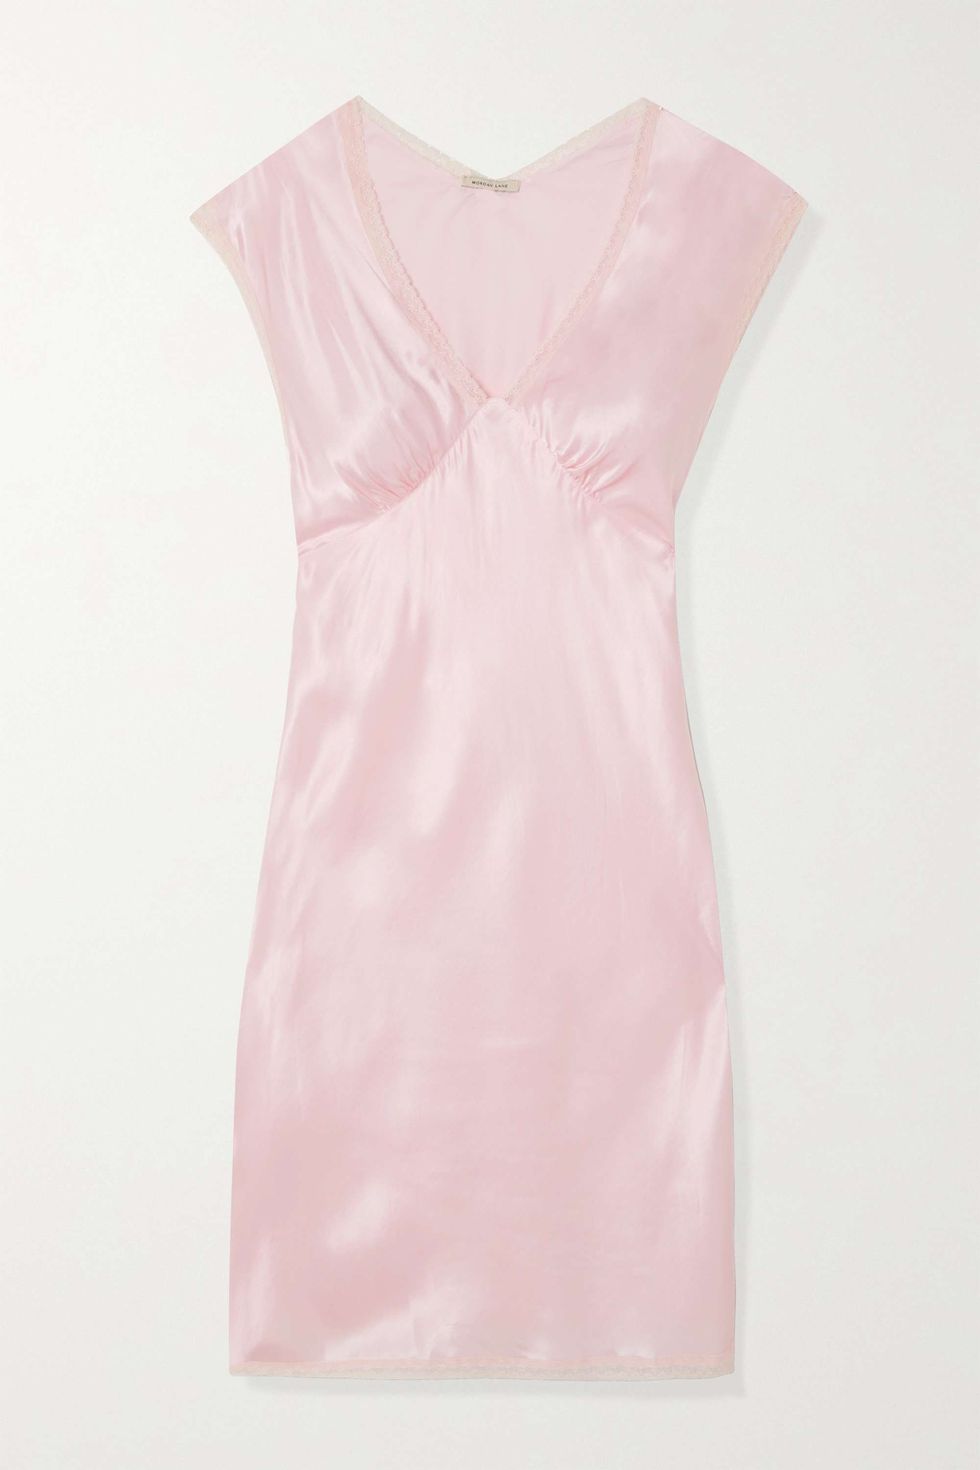 Cordelia Lace-Trimmed Satin Nightdress